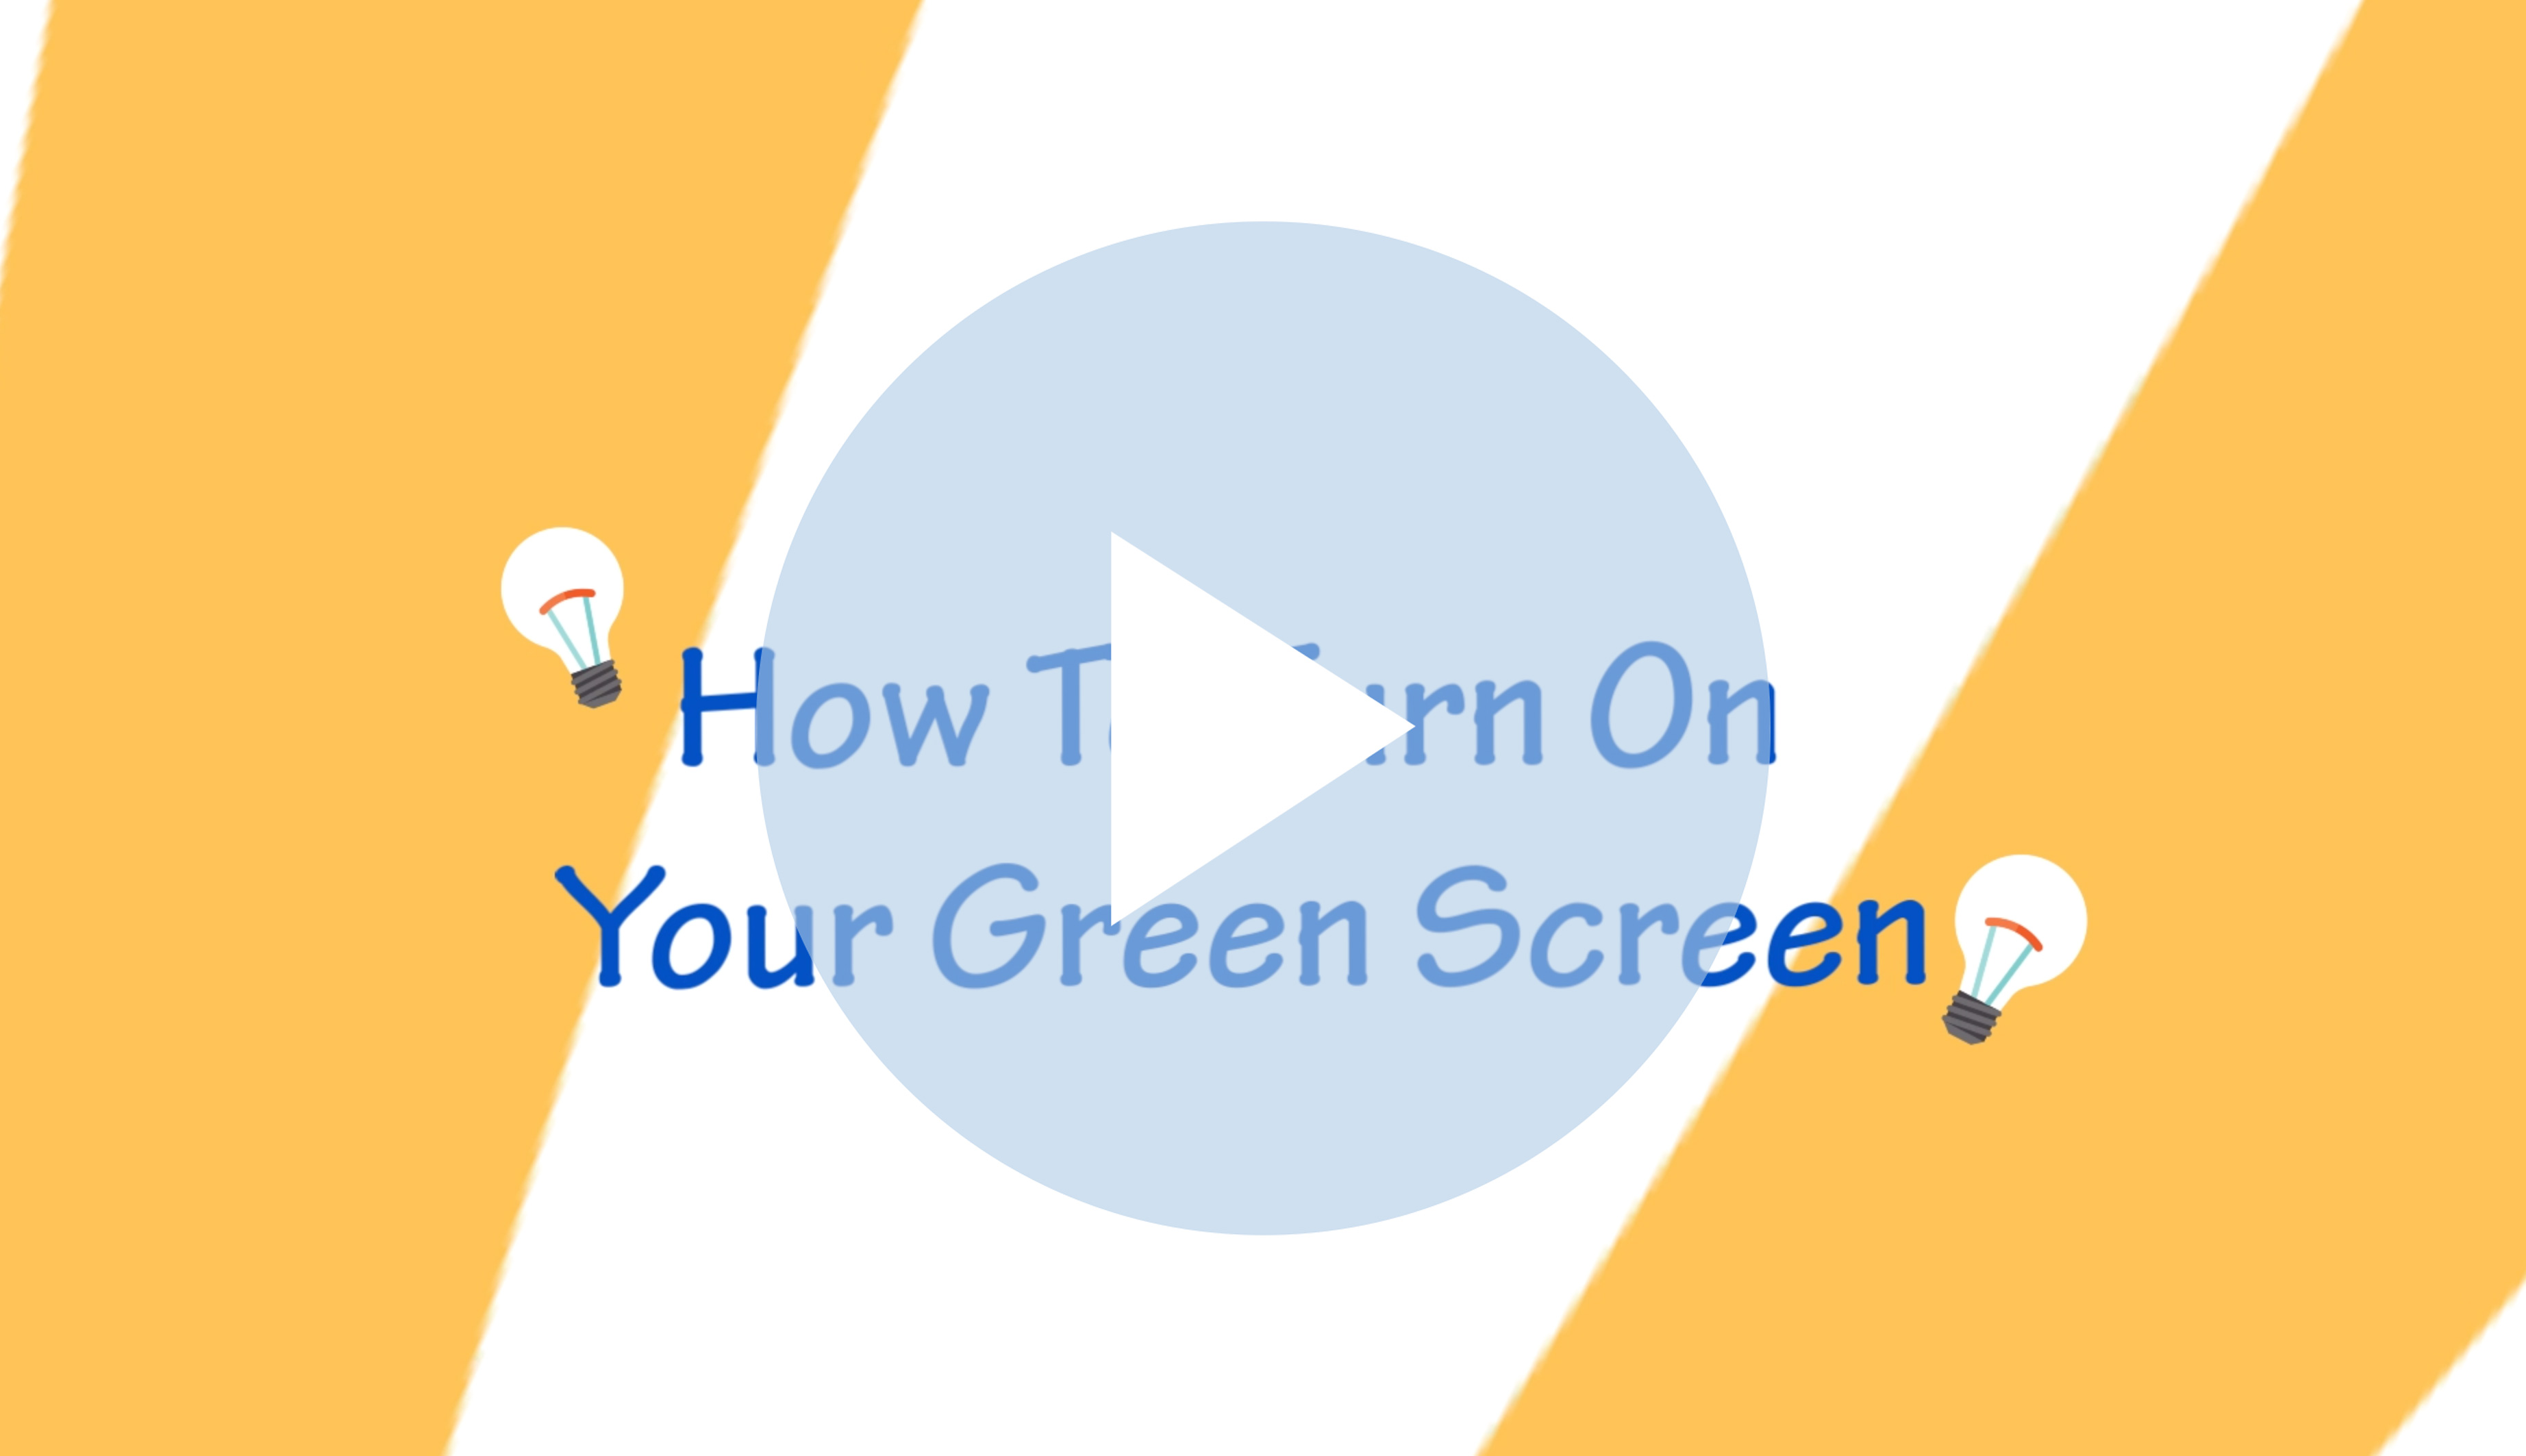 How To Turn On Your Green Screen